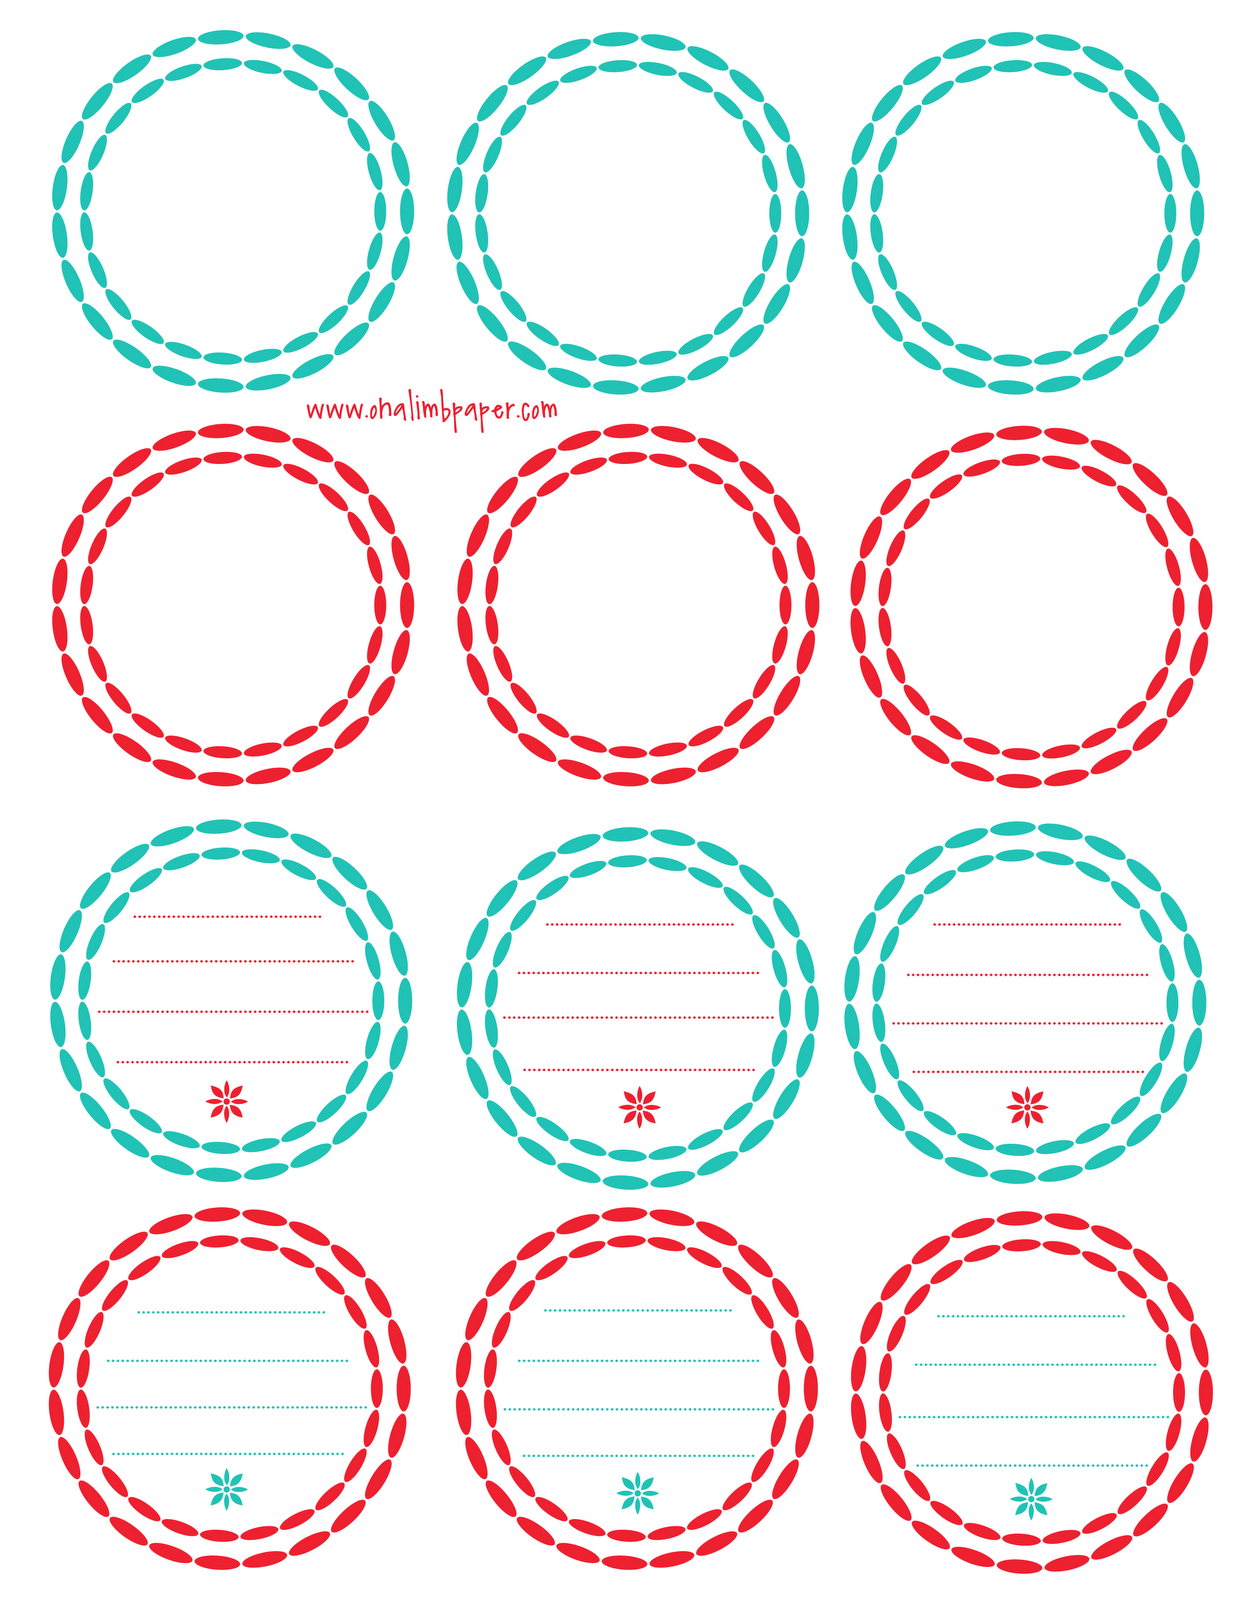 7-best-images-of-round-blank-printable-gift-tags-free-printable-round-tags-and-labels